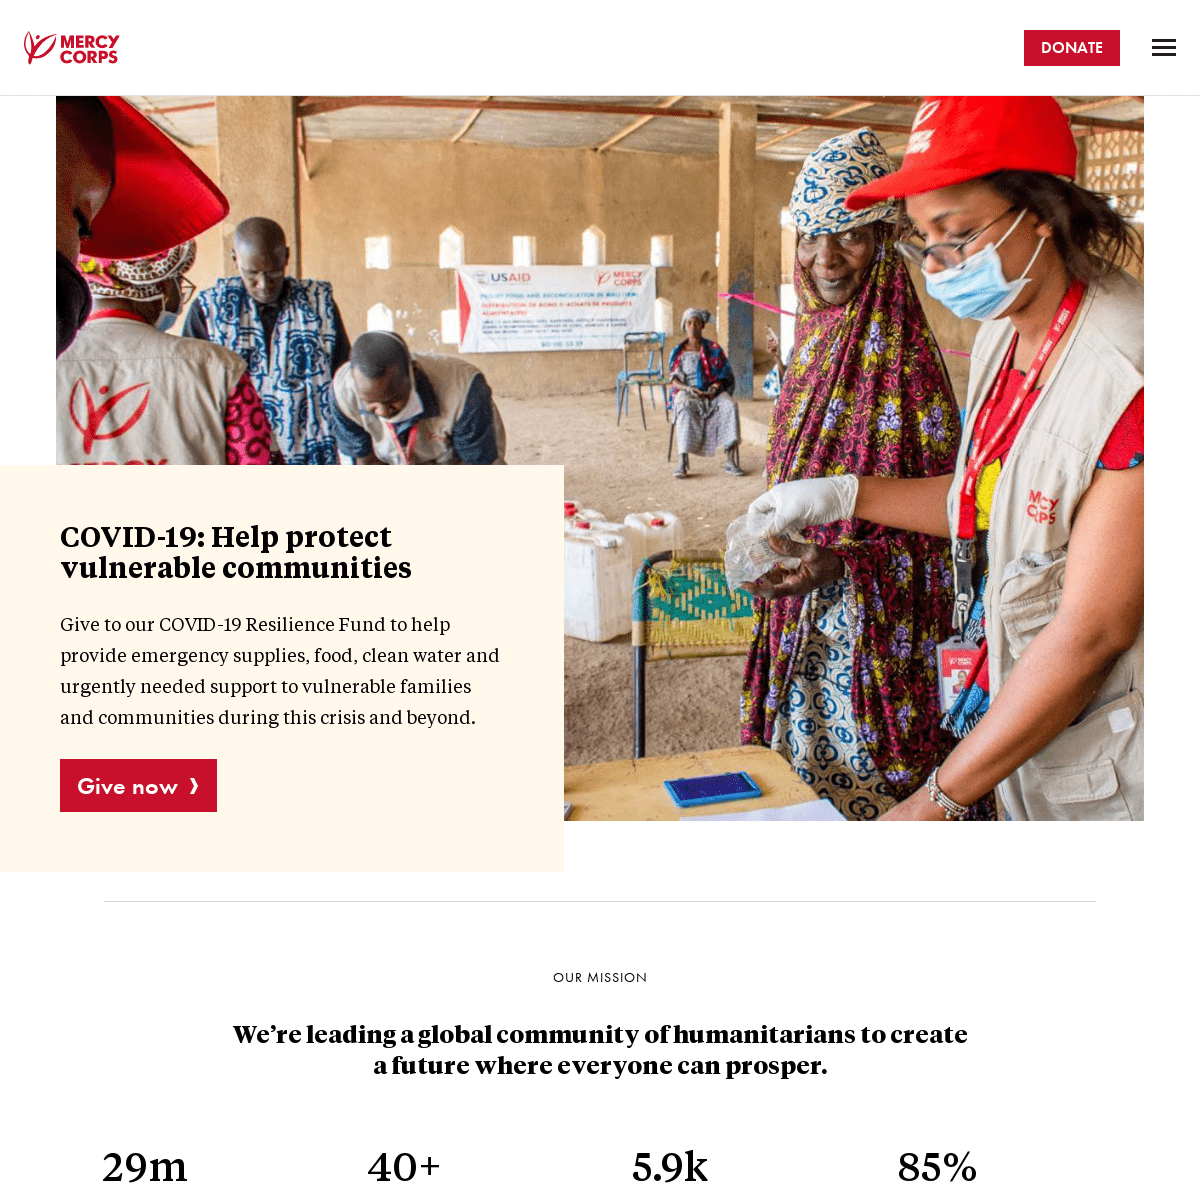 A complete backup of mercycorps.org